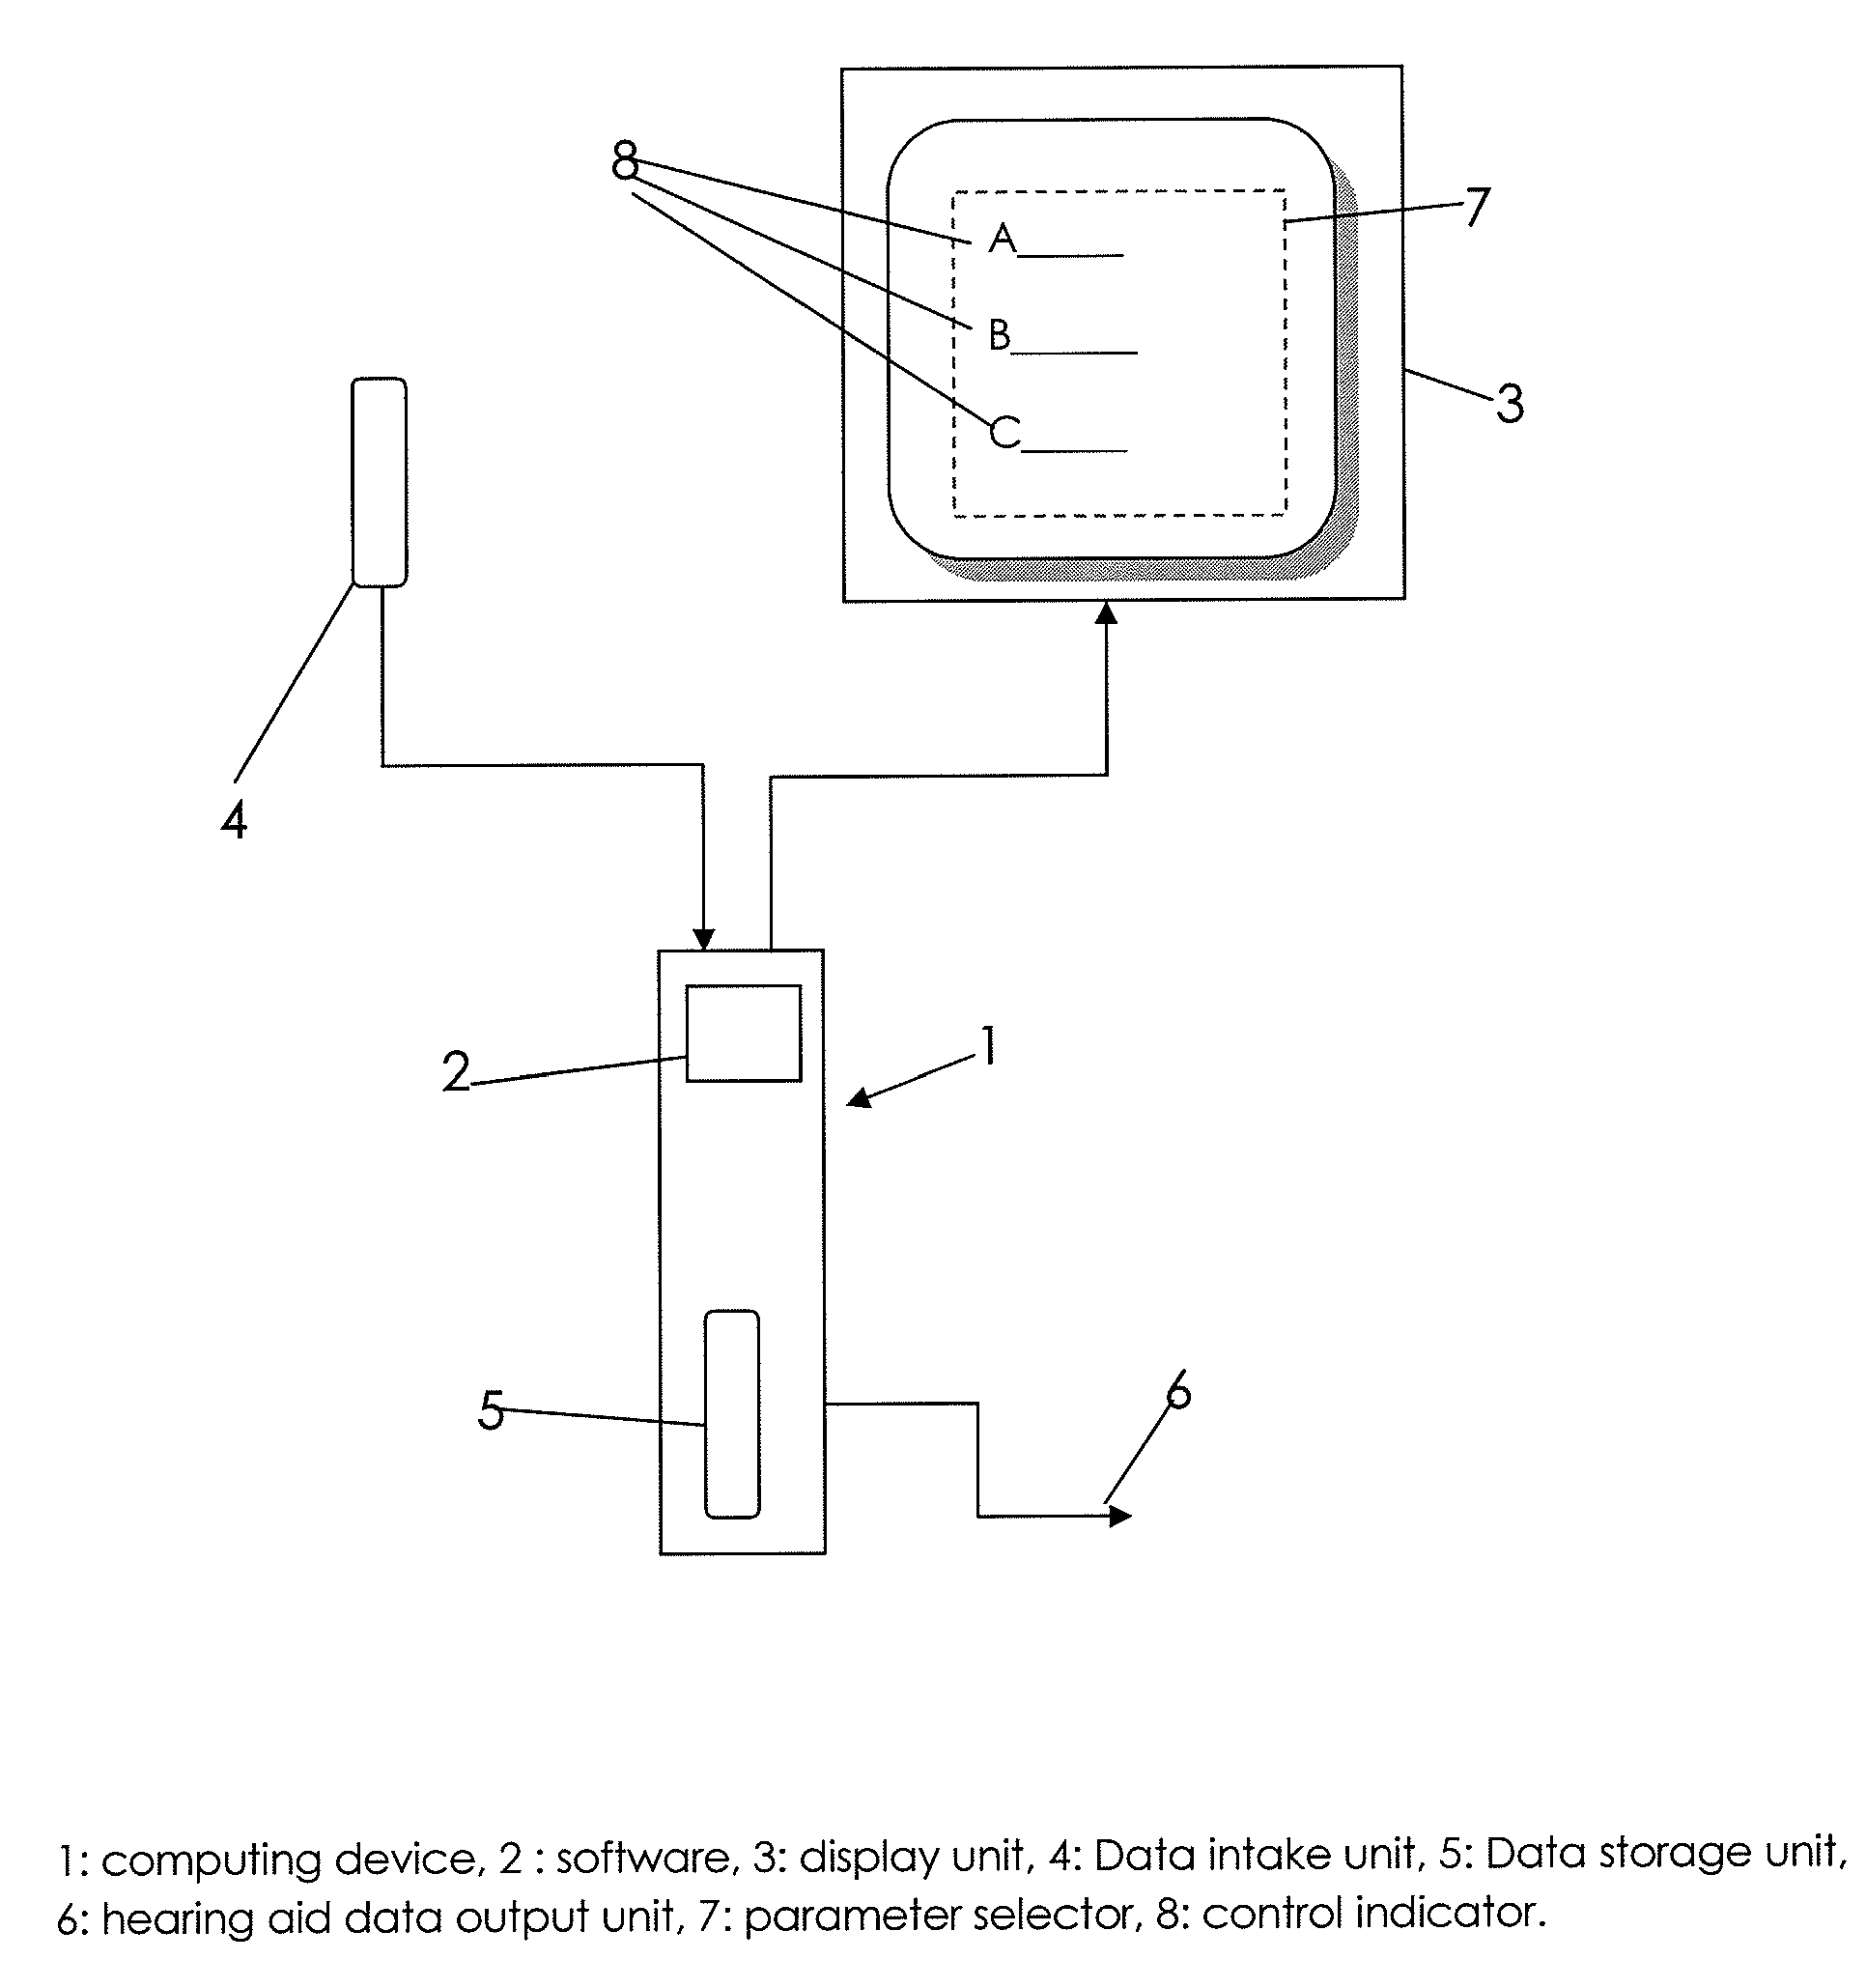 Equipment for fitting a hearing aid to the specific needs of a hearing impaired individual and software for use in a fitting equipment for fitting a hearing aid